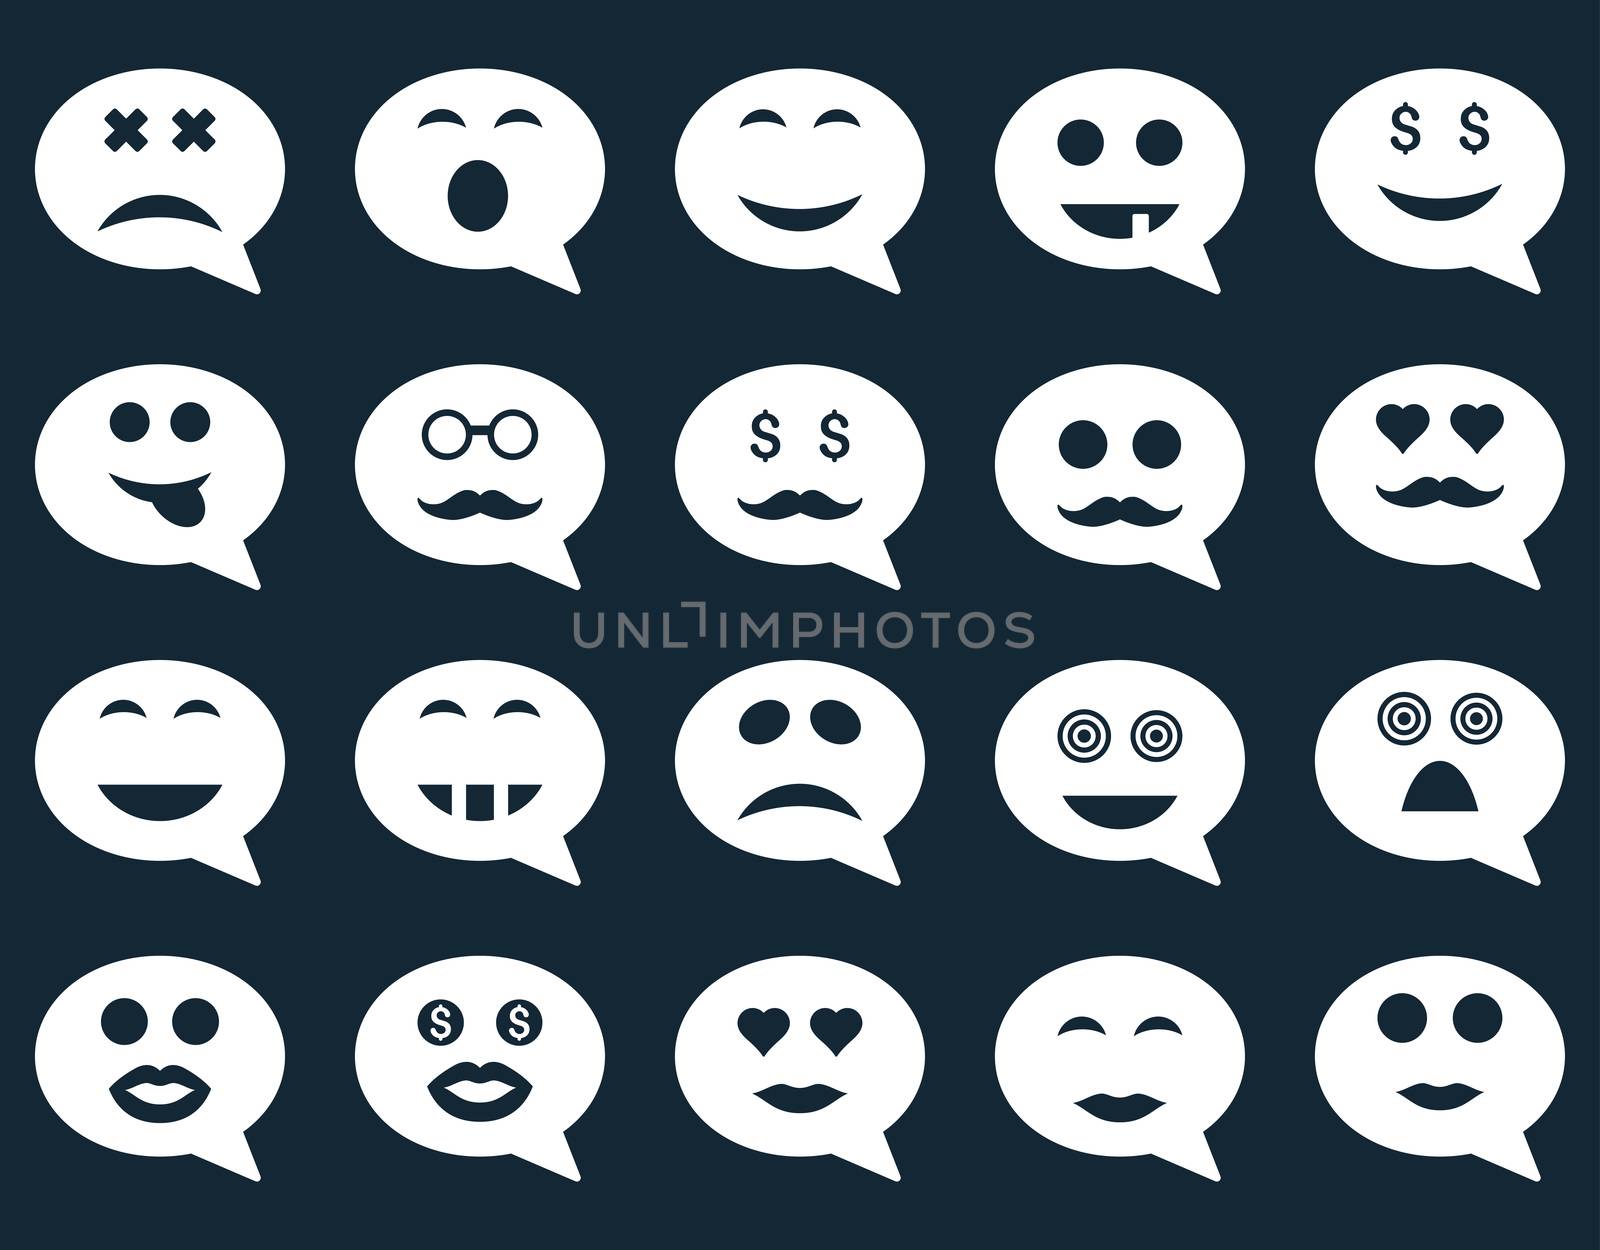 Chat emotion smile icons. Glyph set style is flat images, white symbols, isolated on a dark blue background.